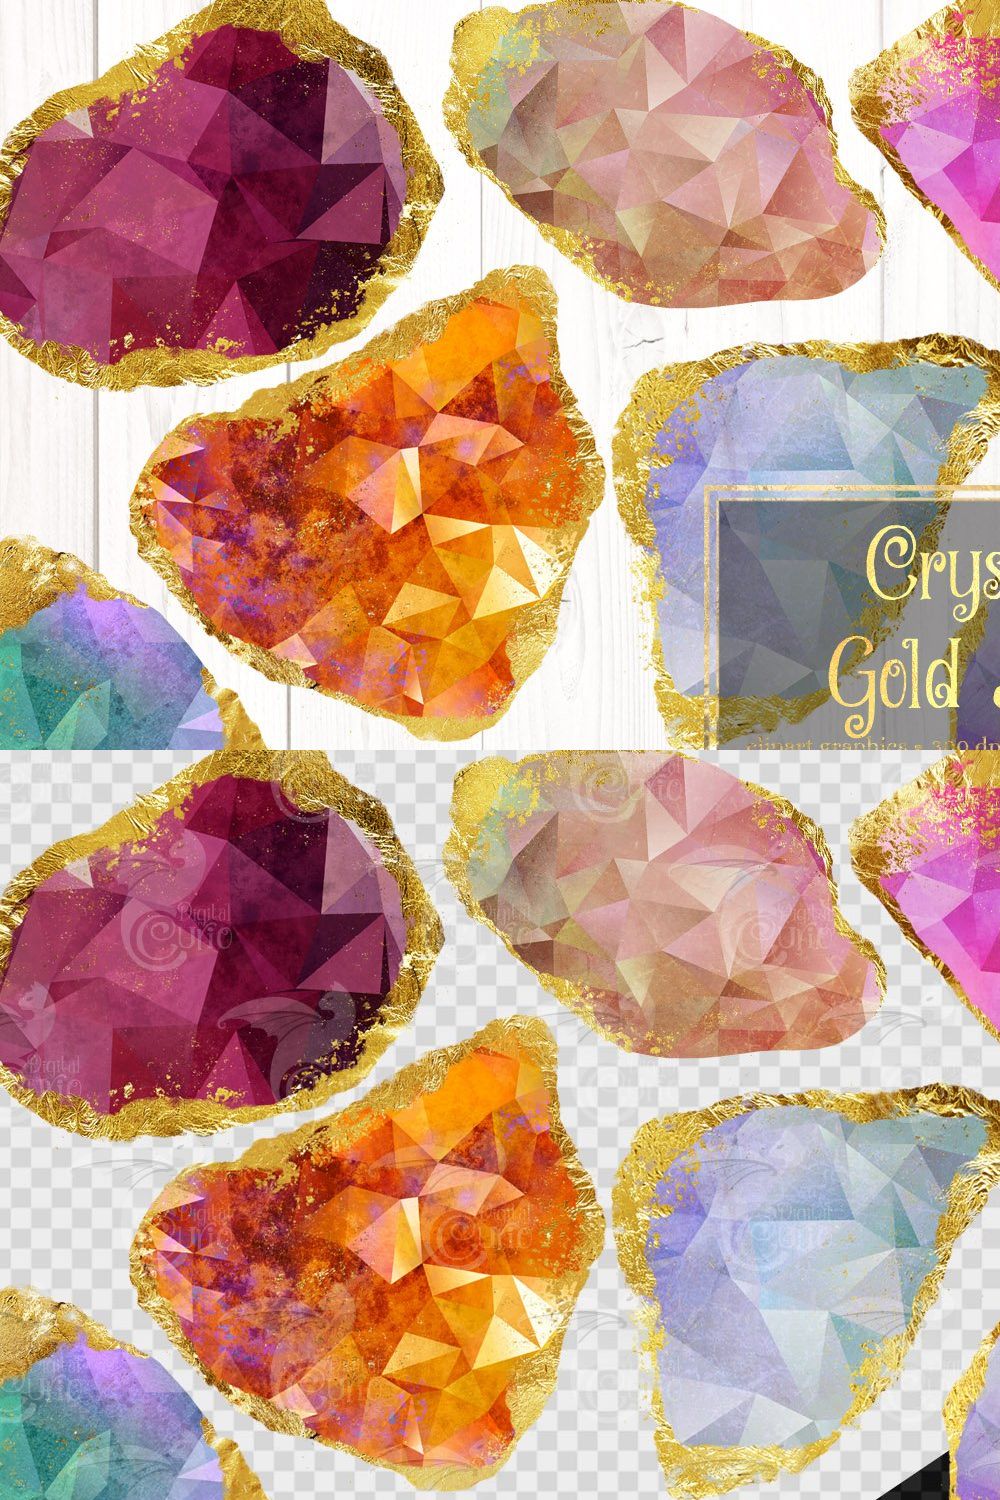 Crystallic Gold Jewels Clipart pinterest preview image.